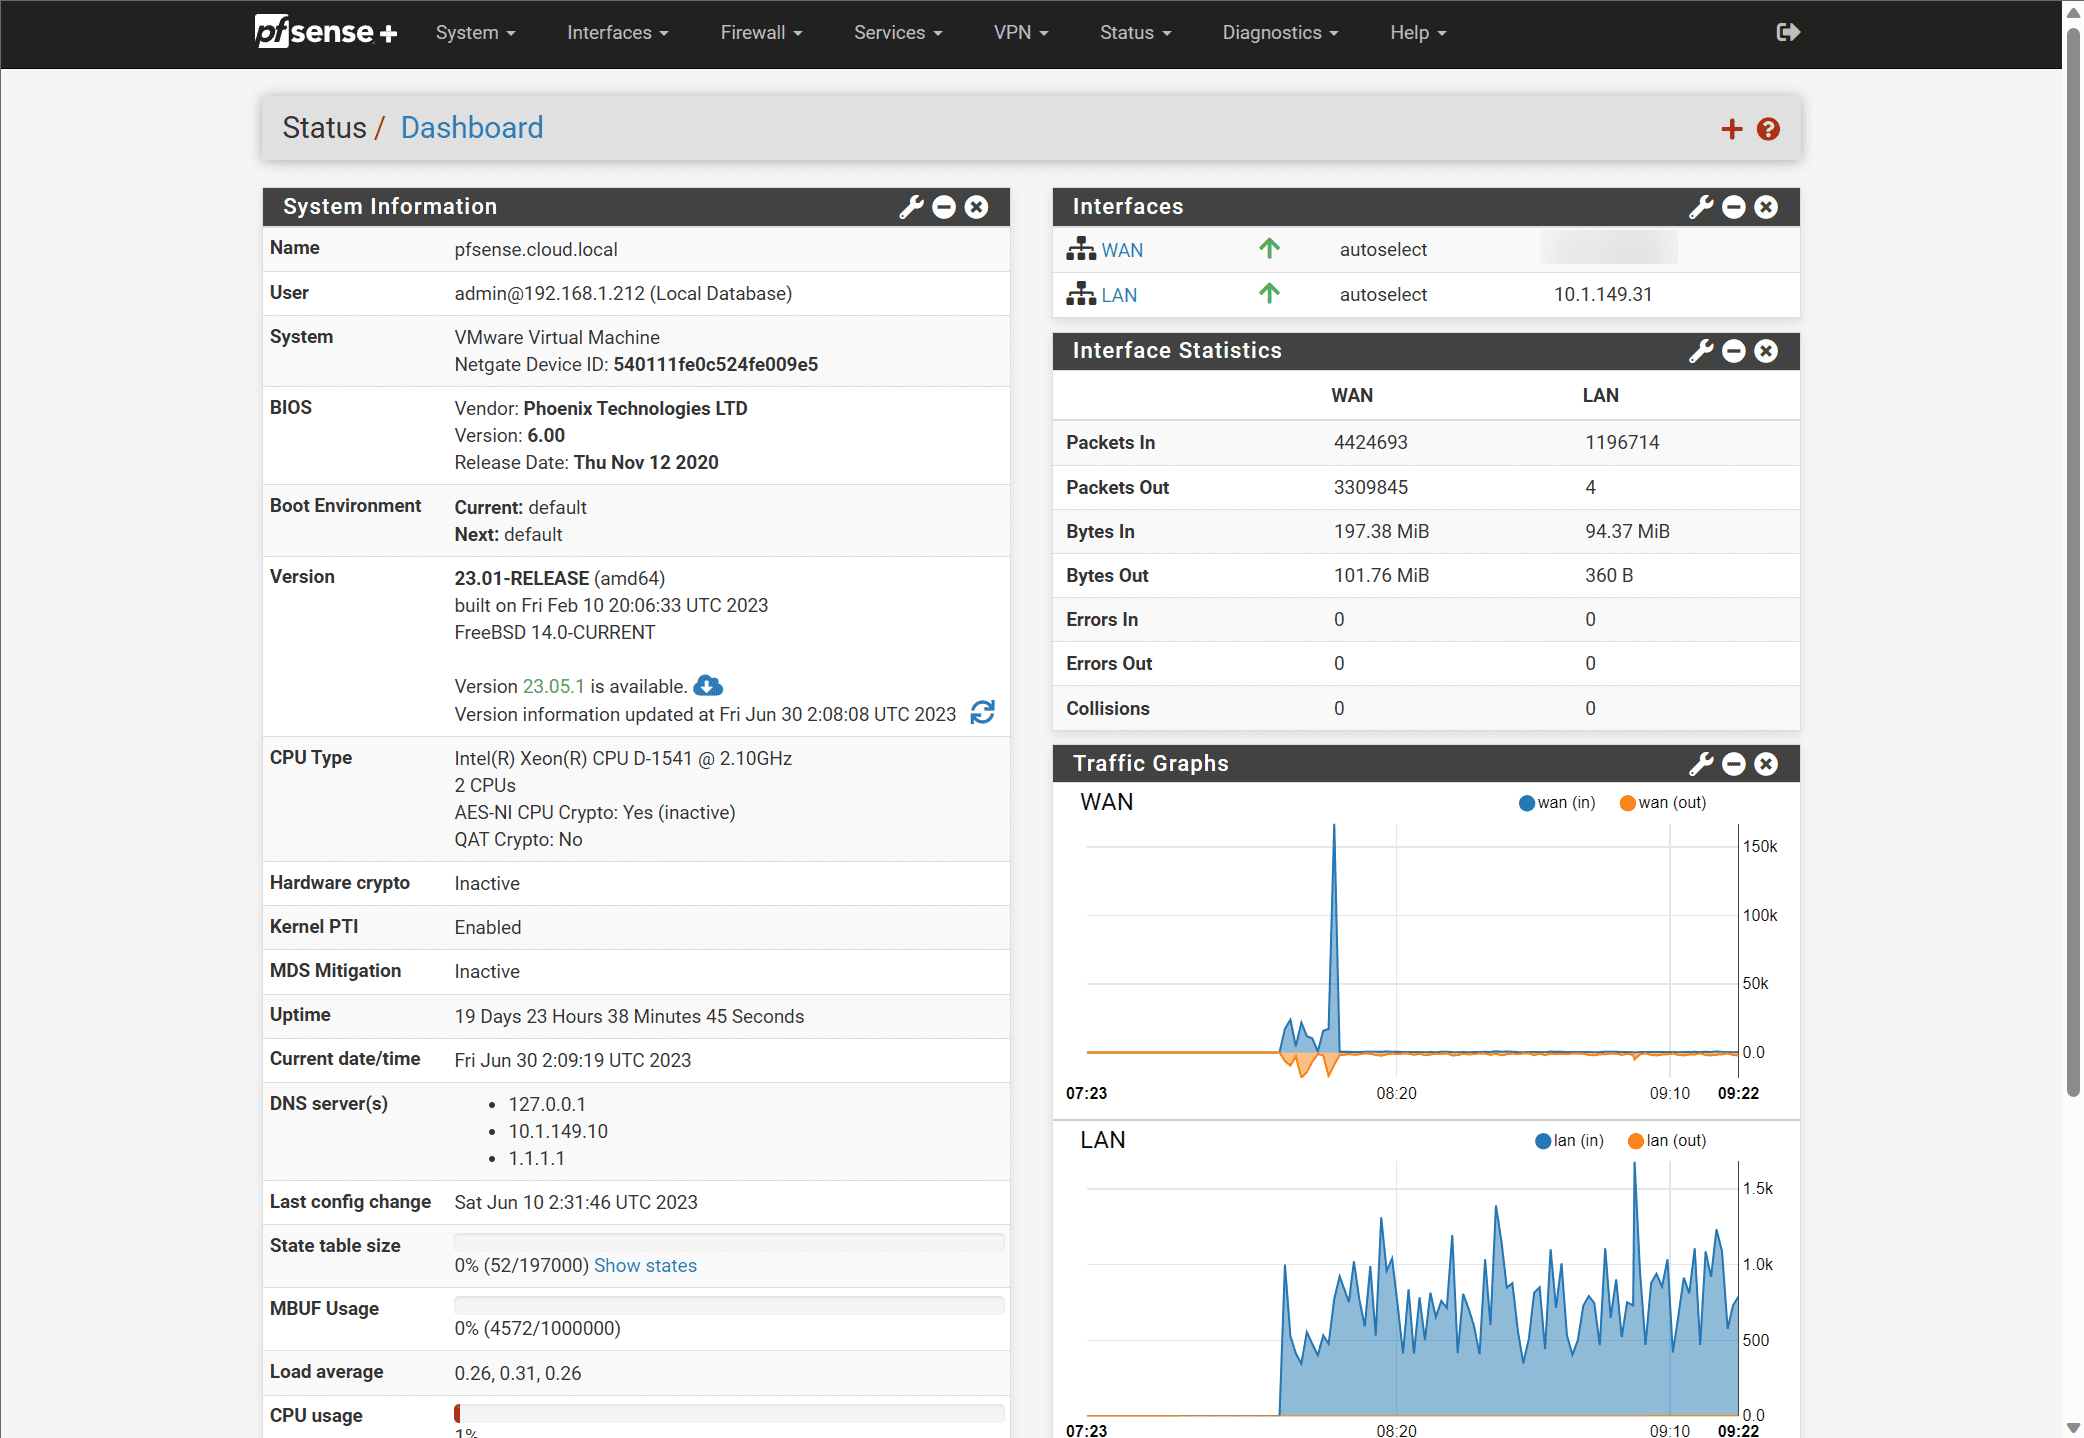 pfSense CE and pfSense Pluse are great firewall solutions